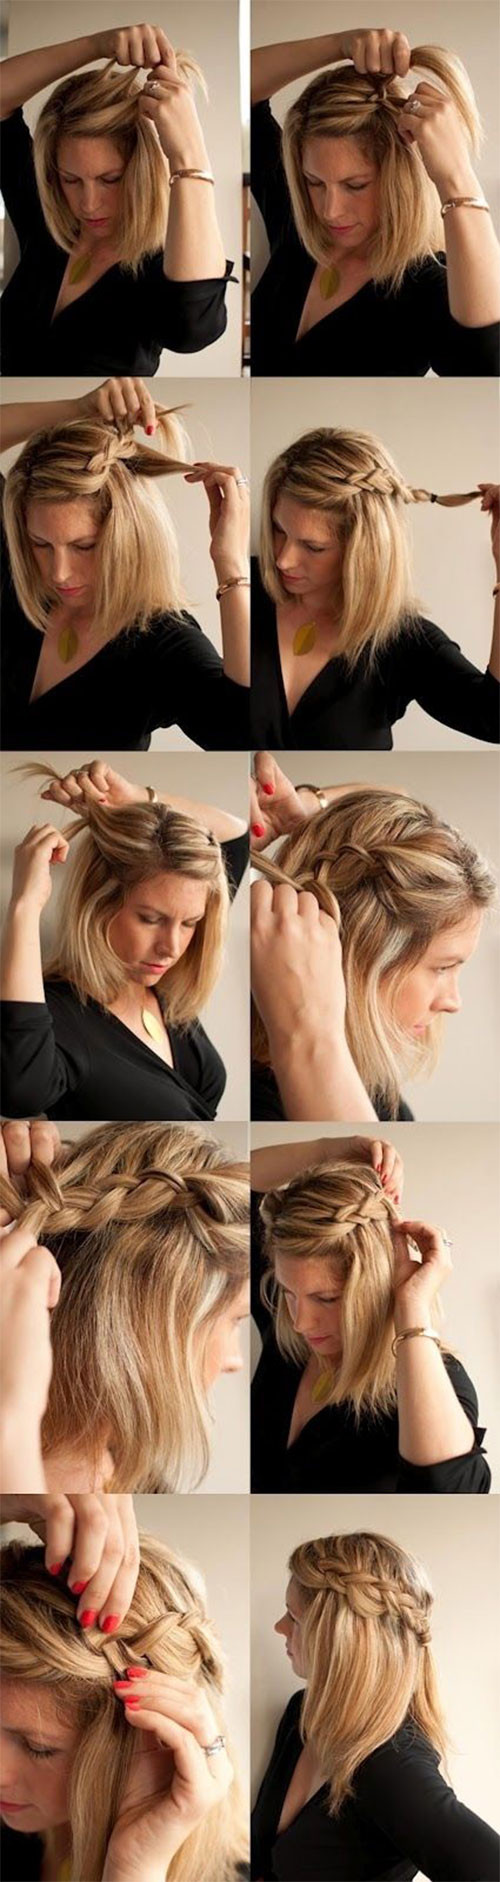 Easy Braided Hairstyles To Do Yourself
 20 Easy Step By Step Summer Braids Style Tutorials For